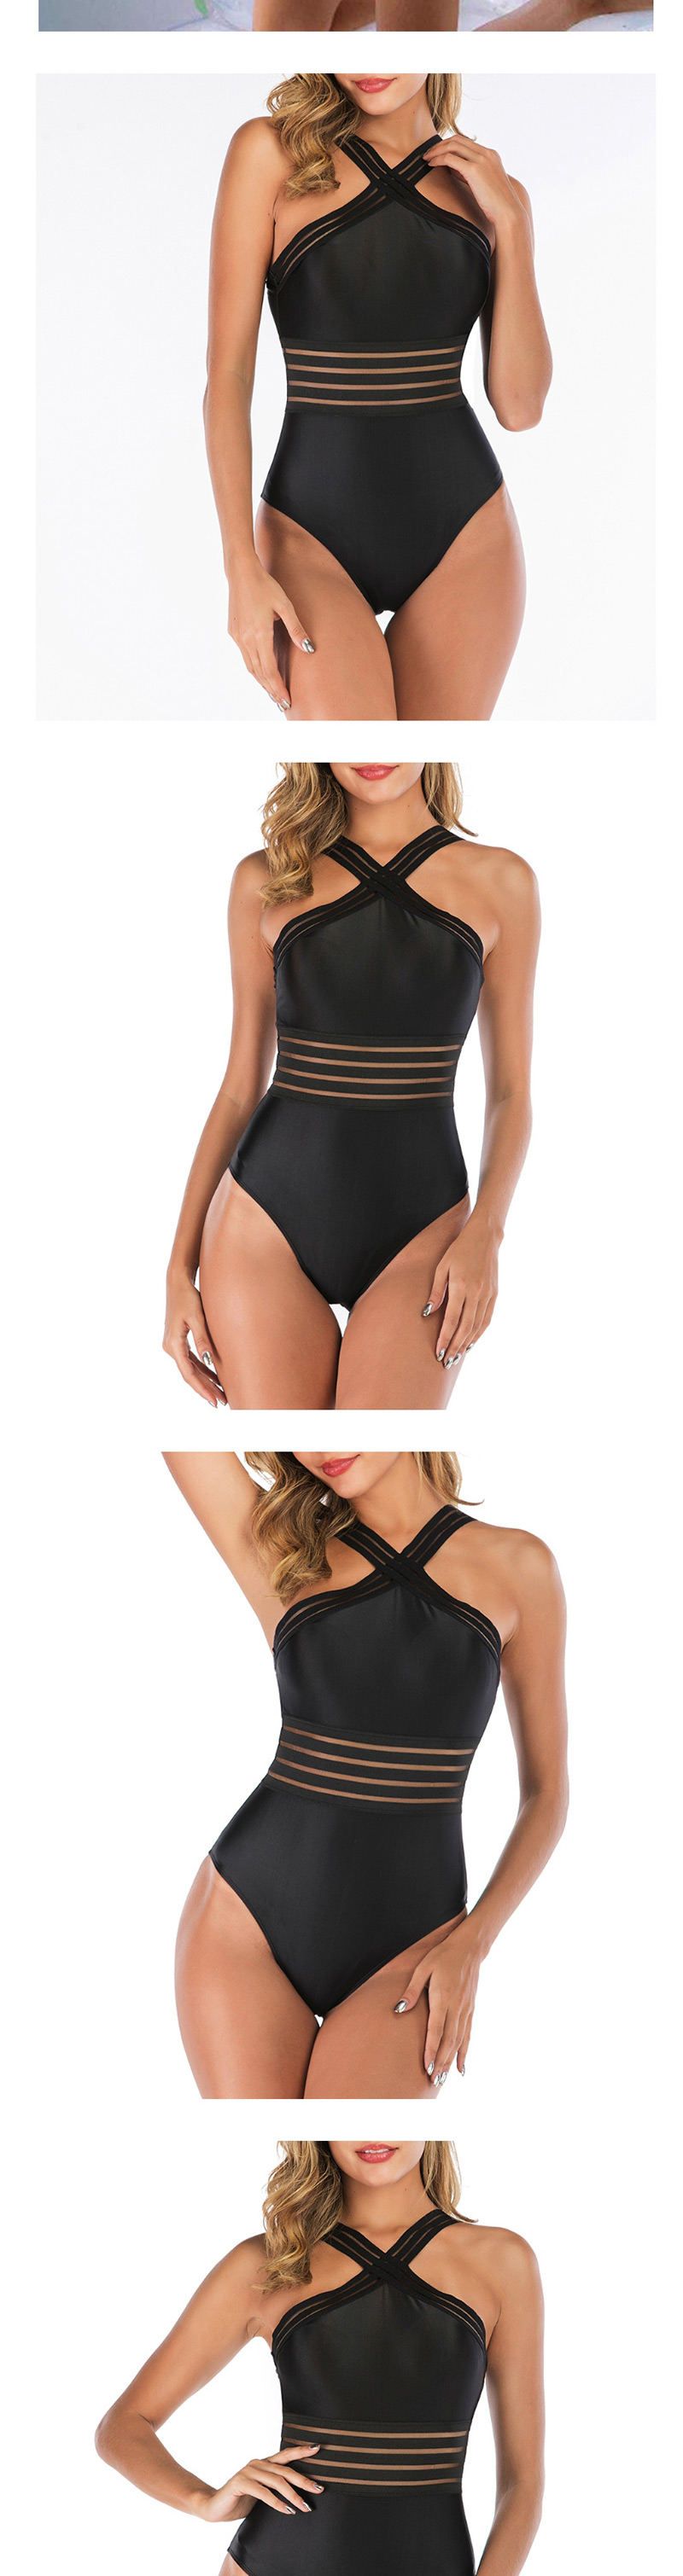 Fashion Red Ribbon Bandage Cross-piece Swimsuit,One Pieces